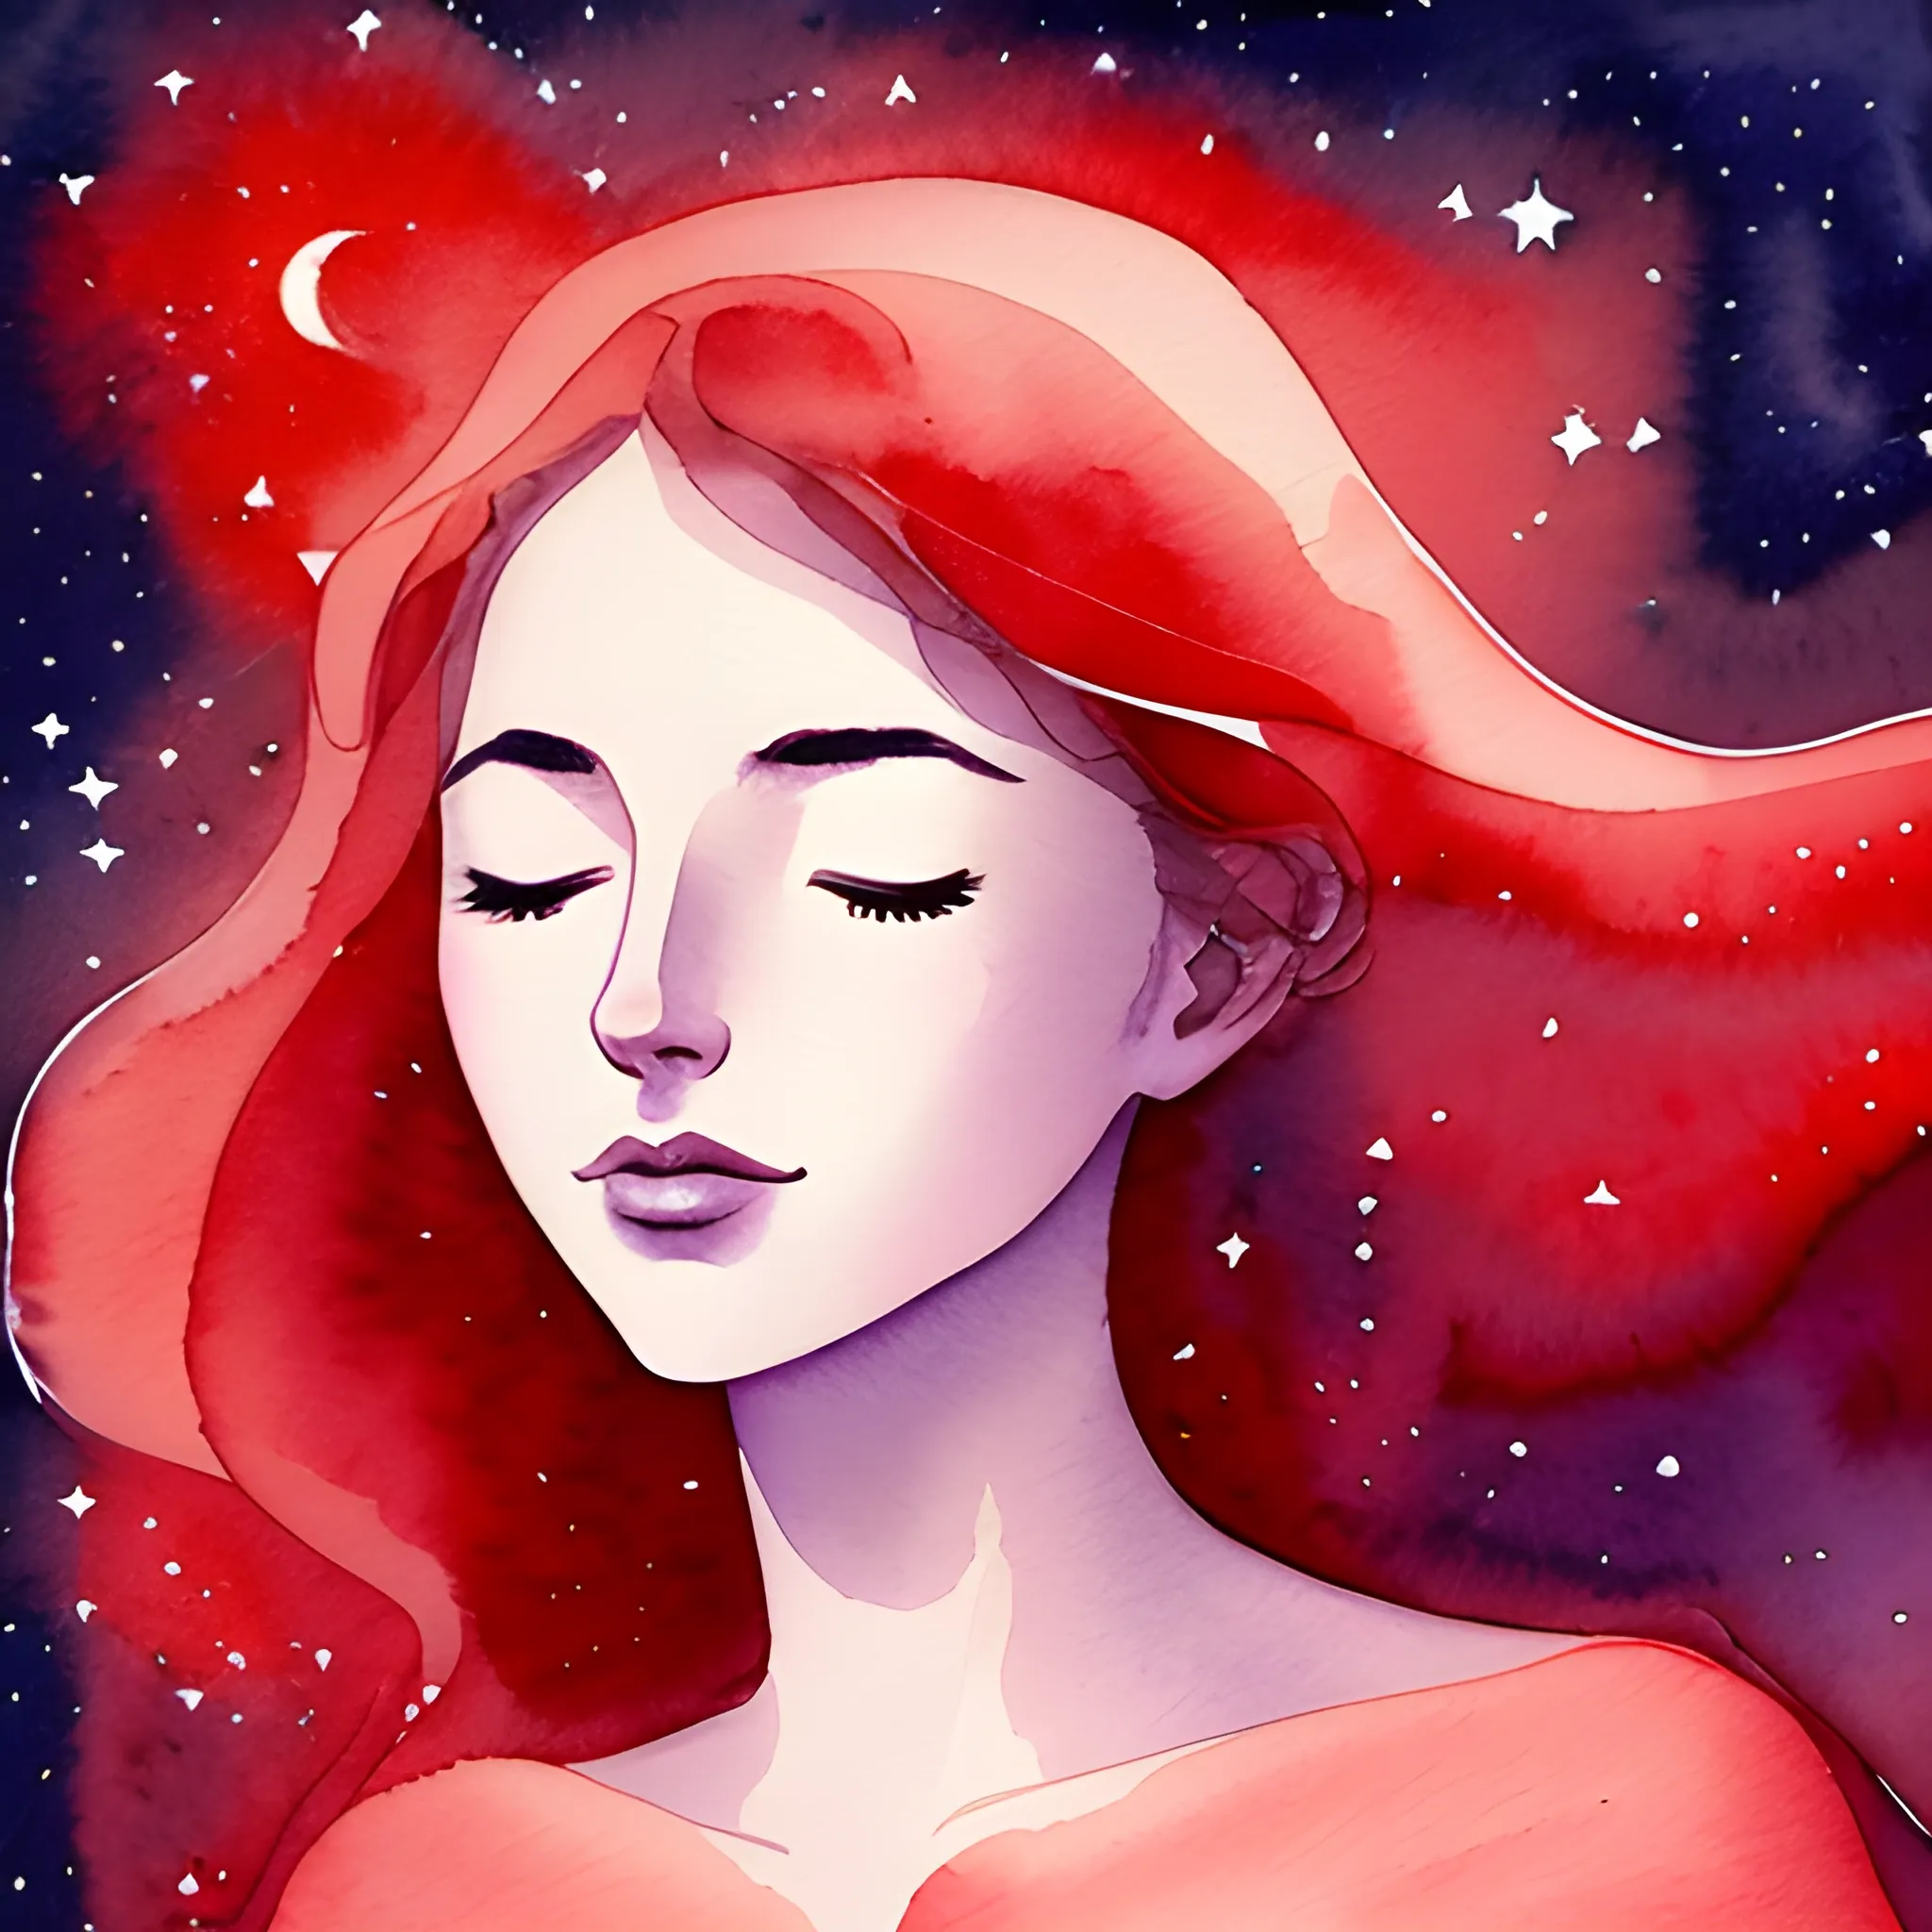 Draw a woman with closed eyes, floating in a night sky filled with stars, while her dreams unfold as luminous constellations around her. Use a single-color watercolor technique (red) to capture the magical feeling of this dream in the style of Francisco Garcés, alias Dibujante Nocturno